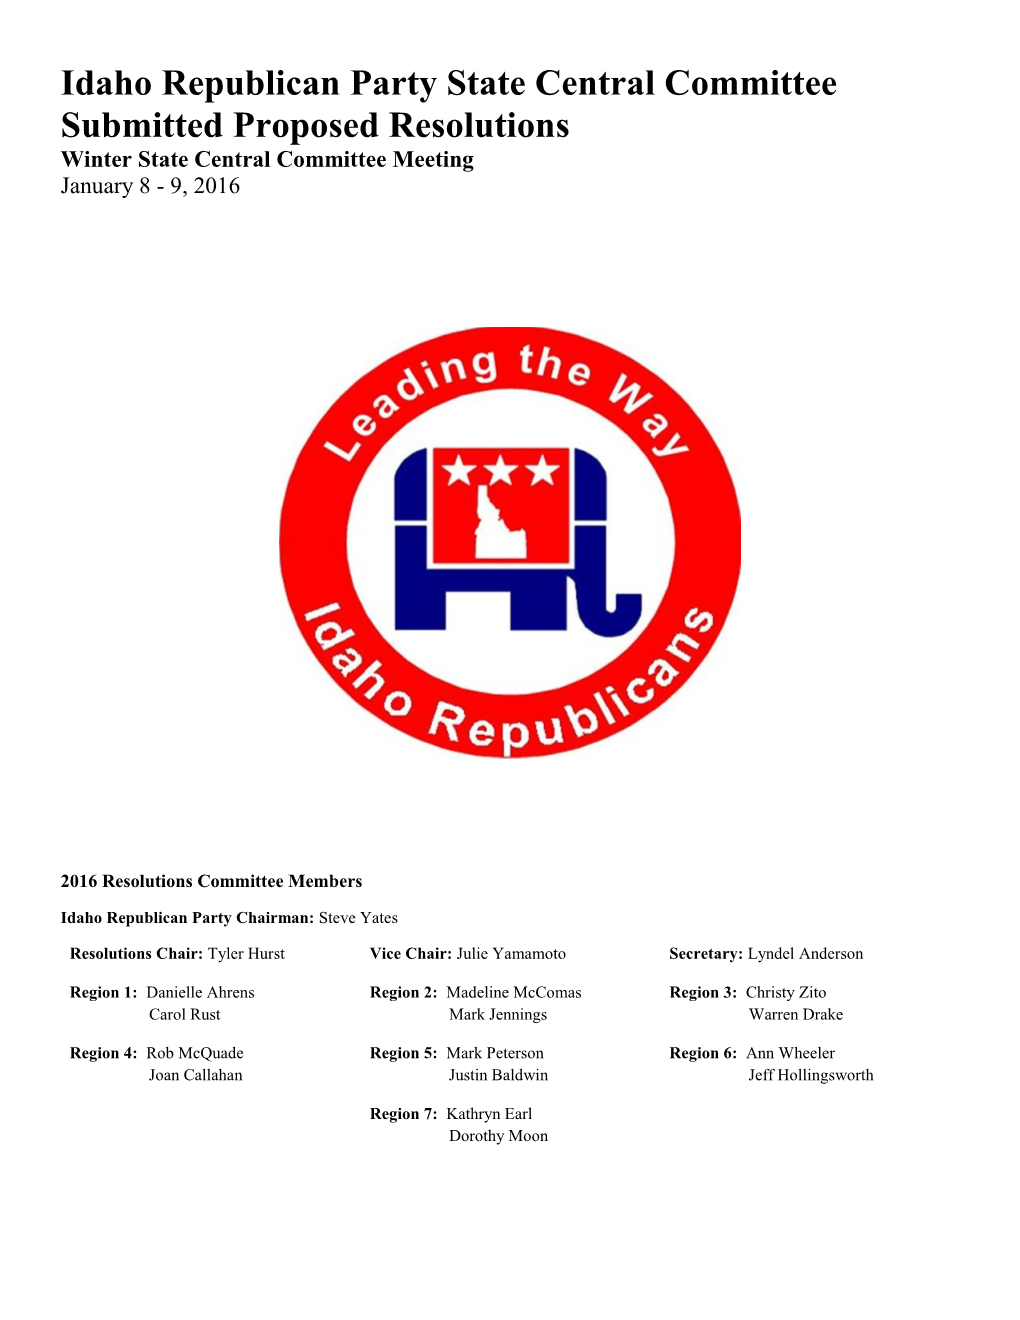 Idaho Republican Party State Central Committee Submitted Proposed Resolutions Winter State Central Committee Meeting January 8 - 9, 2016